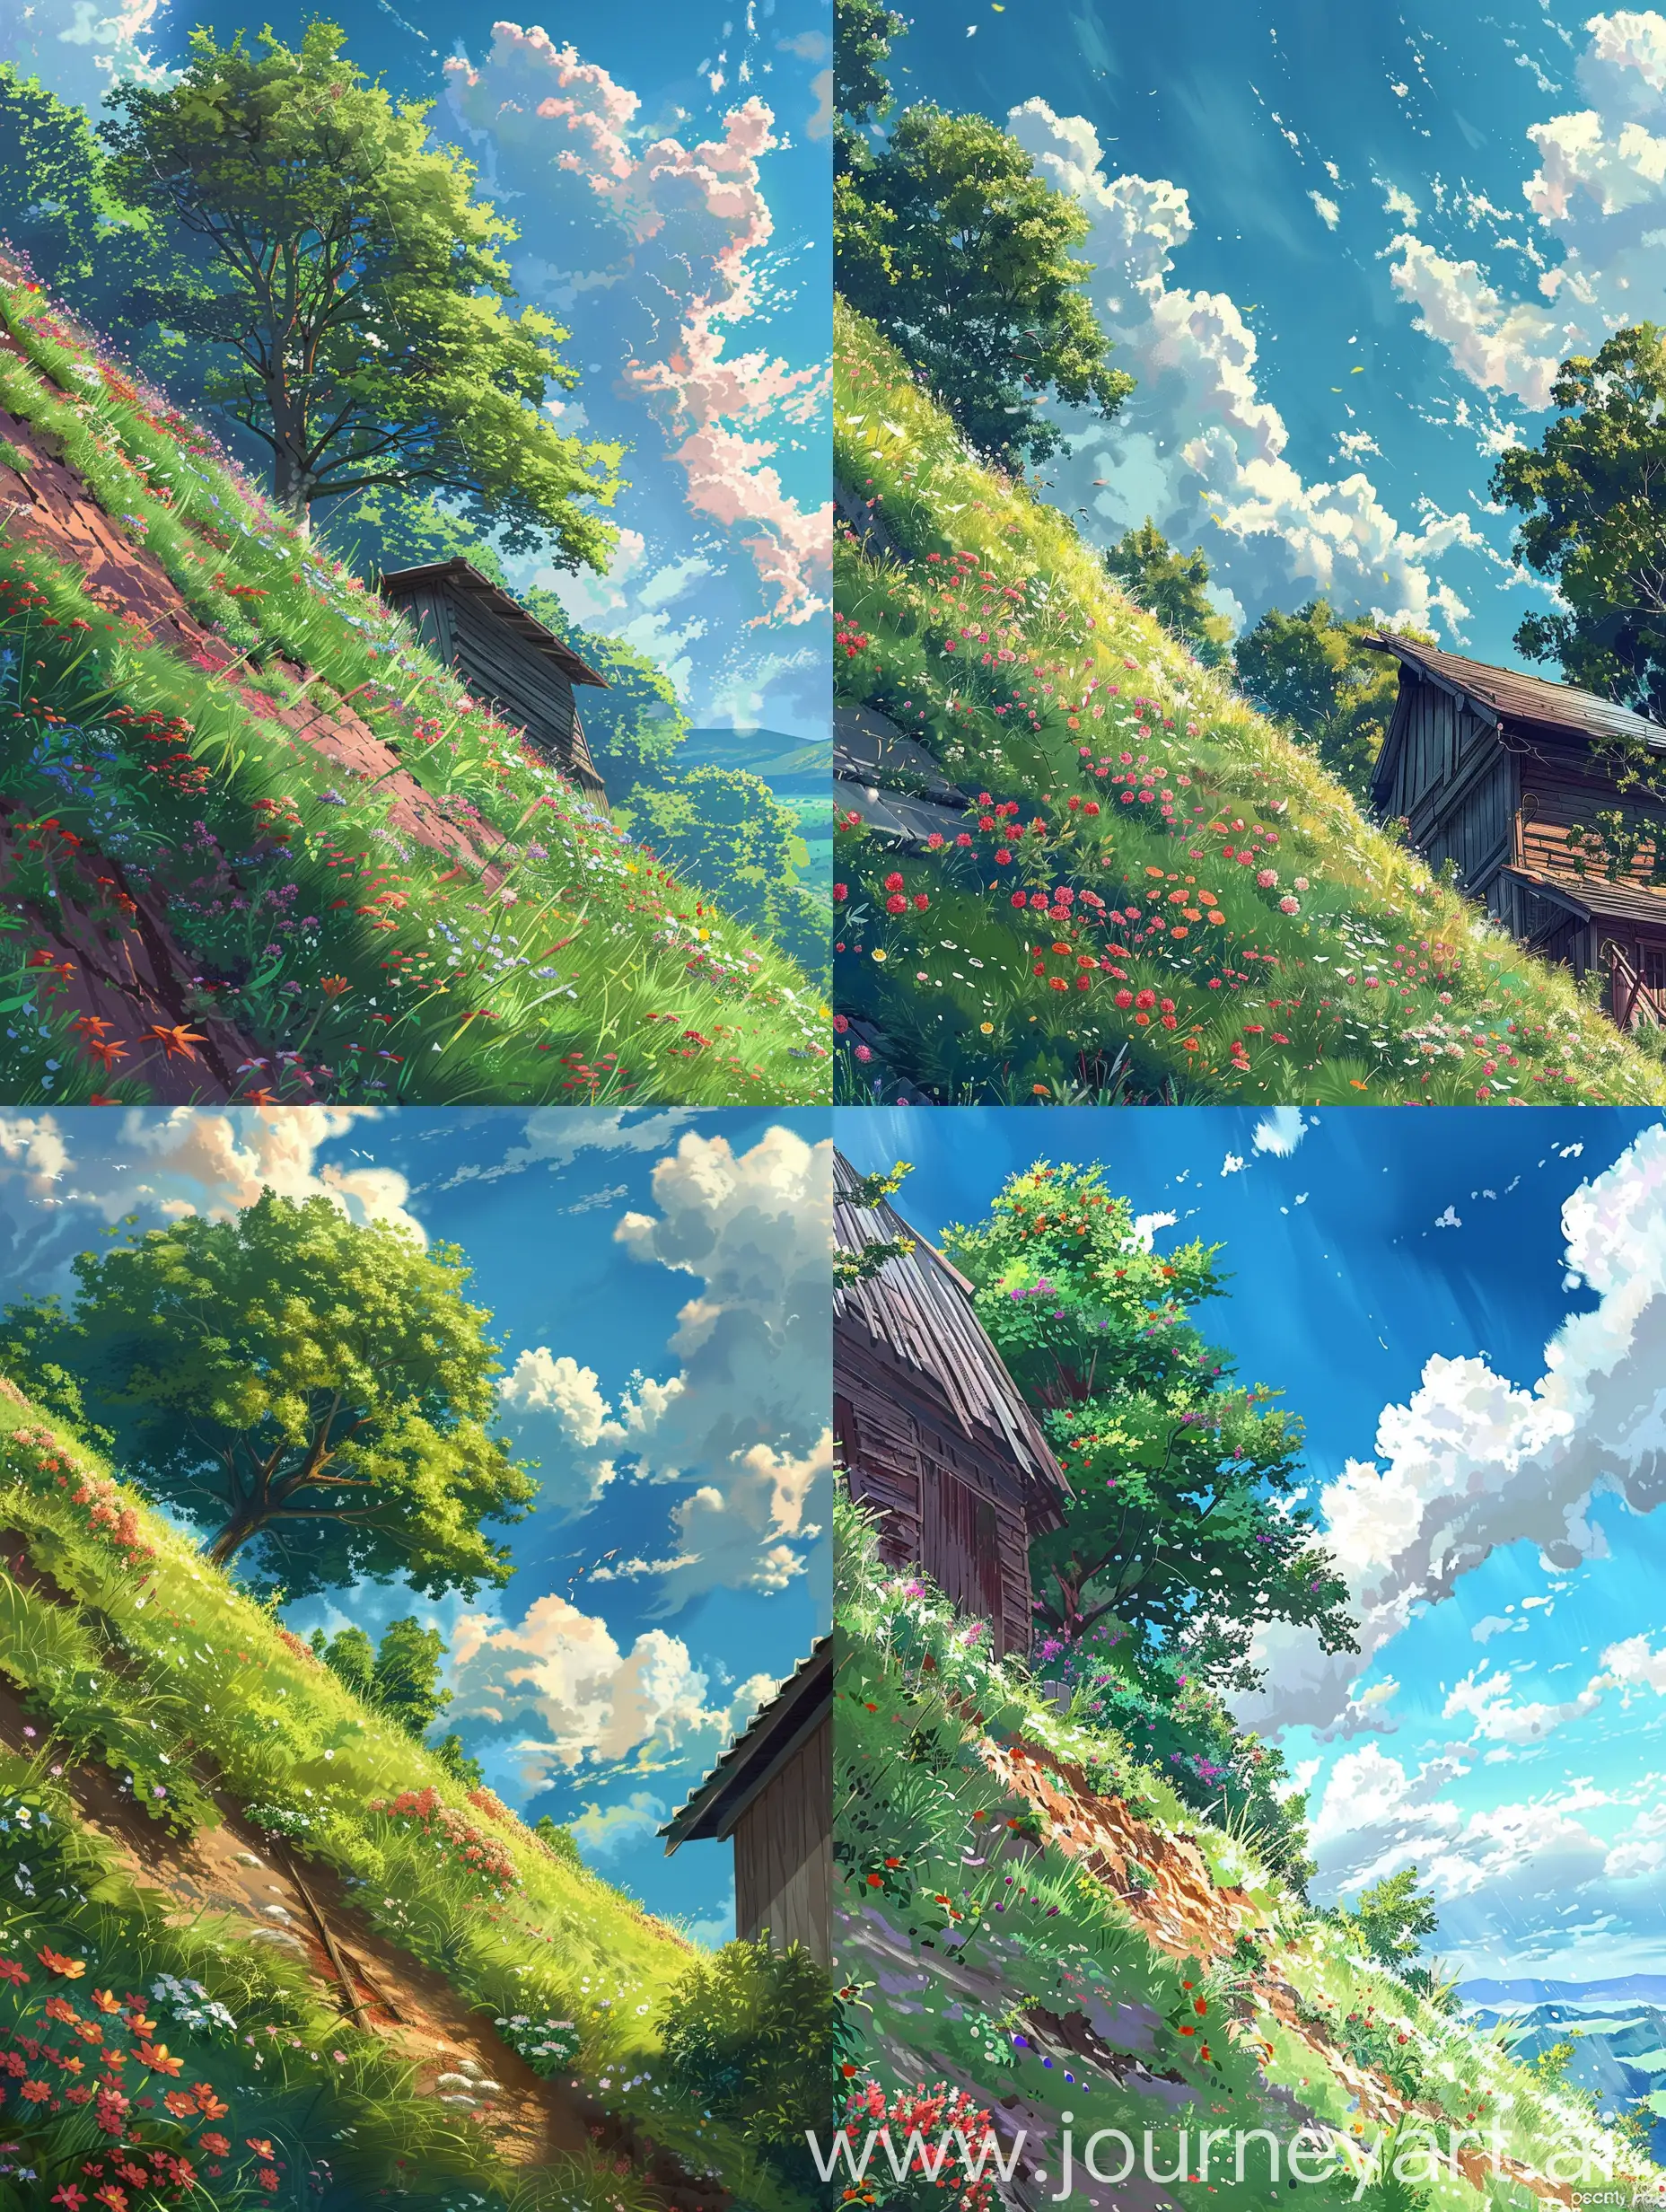 Beautiful anime style,Makoto Shinkai style,a giant slope with a little bit of grass,summer season,some vibrant flowers,a beautiful tree which is providing shed,beautiful sky with fluffy clouds,a little bit of windy,a vast scene of nature beauty can be seen from the right side,everything is wonder of nature and are perfect,everything is highly detailed,it is taking viewers into true nature beauty,viewers can feel the vibe,Give a touch of studio Ghibli, A wooden house can be seen,peace,tranquility. 